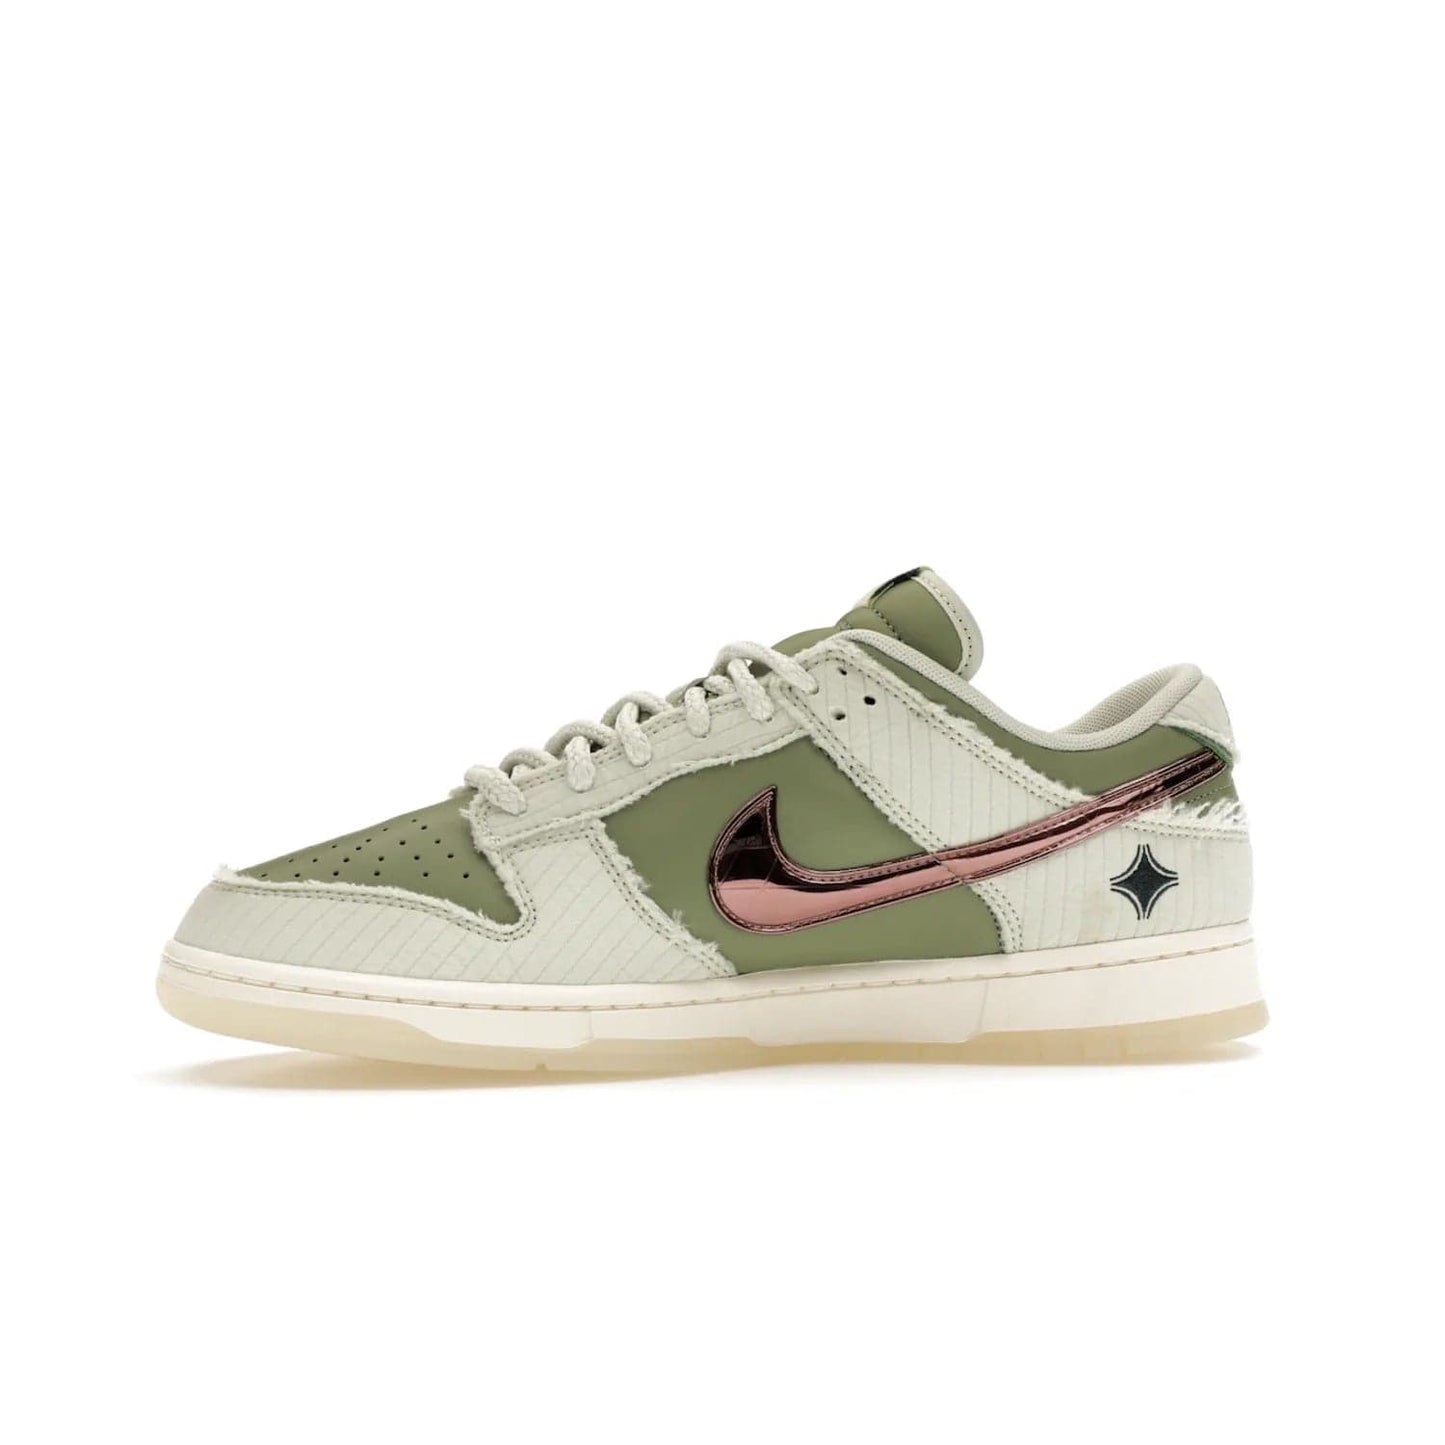 Nike Dunk Low Retro PRM Kyler Murray Be 1 of One - Image 18 - Only at www.BallersClubKickz.com - Introducing the Nike Dunk Low Retro PRM Kyler Murray "Be 1 of One"! A Sea Glass upper with Sail and Oil Green accents, finished with Rose Gold accents. Drop date: November 10th.